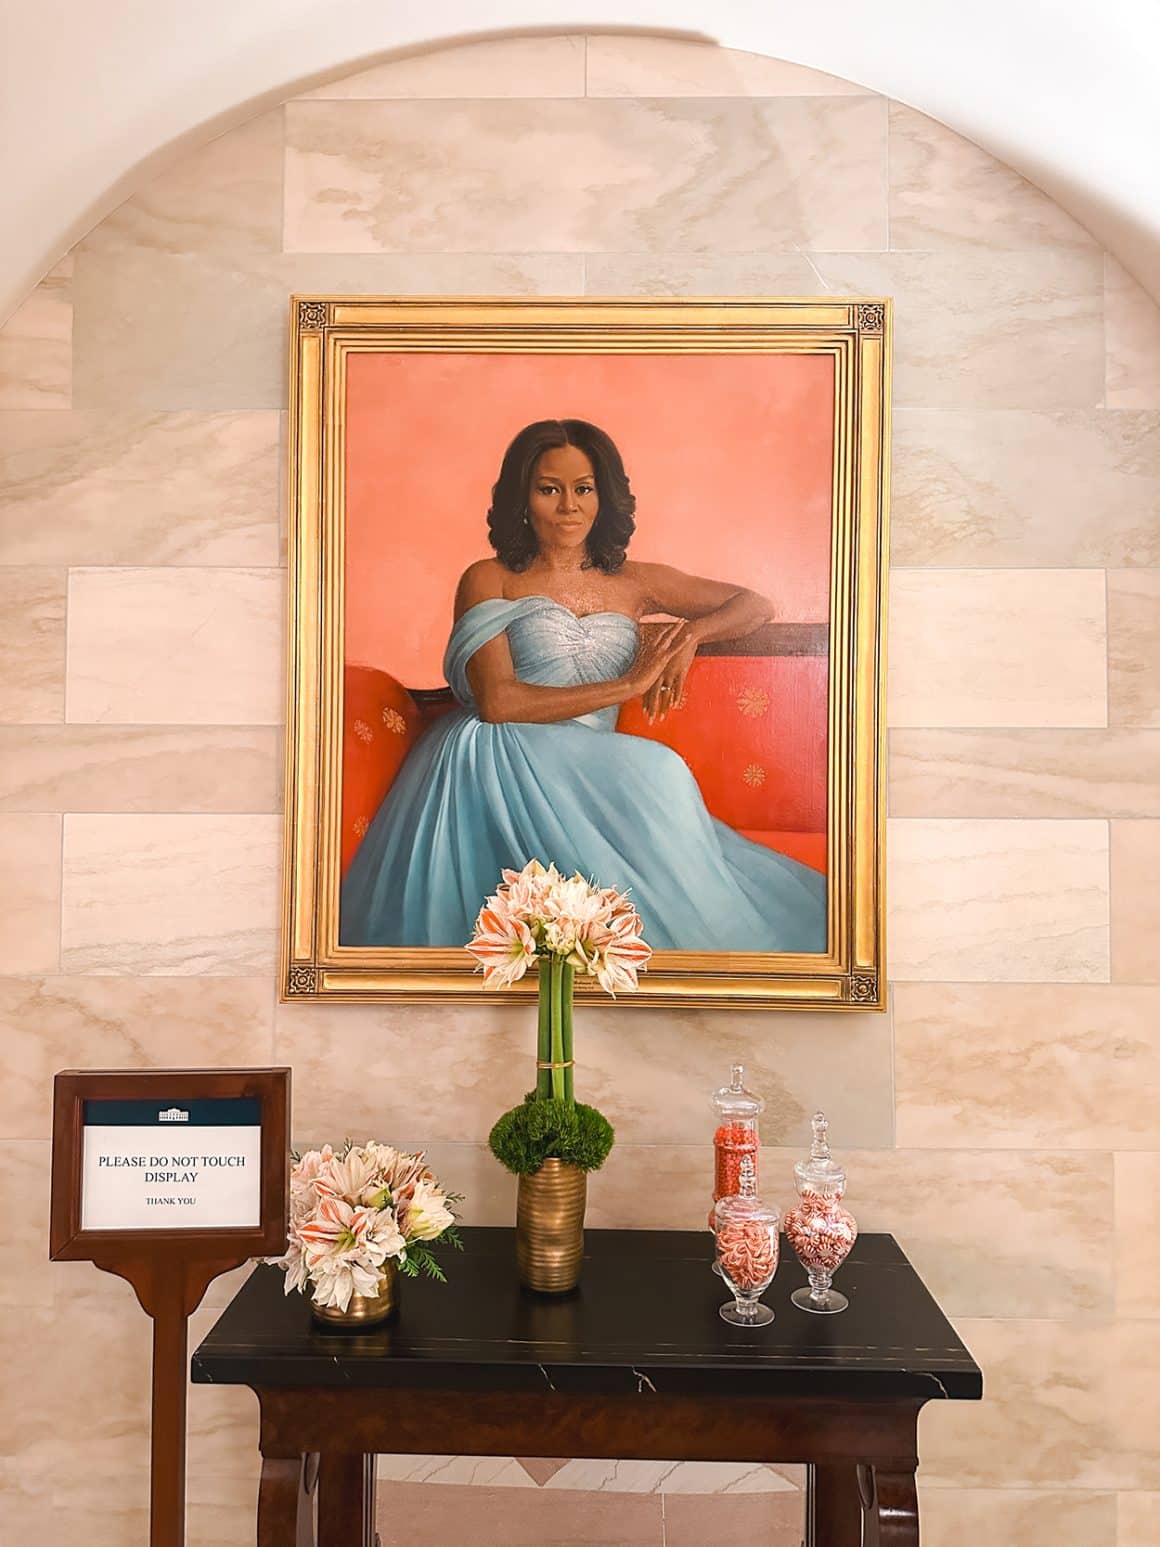 Portrait of First Lady Michelle Obama in the White House during a White House tour in Washington DC- photo by Keryn Means of DCTravelMag.com